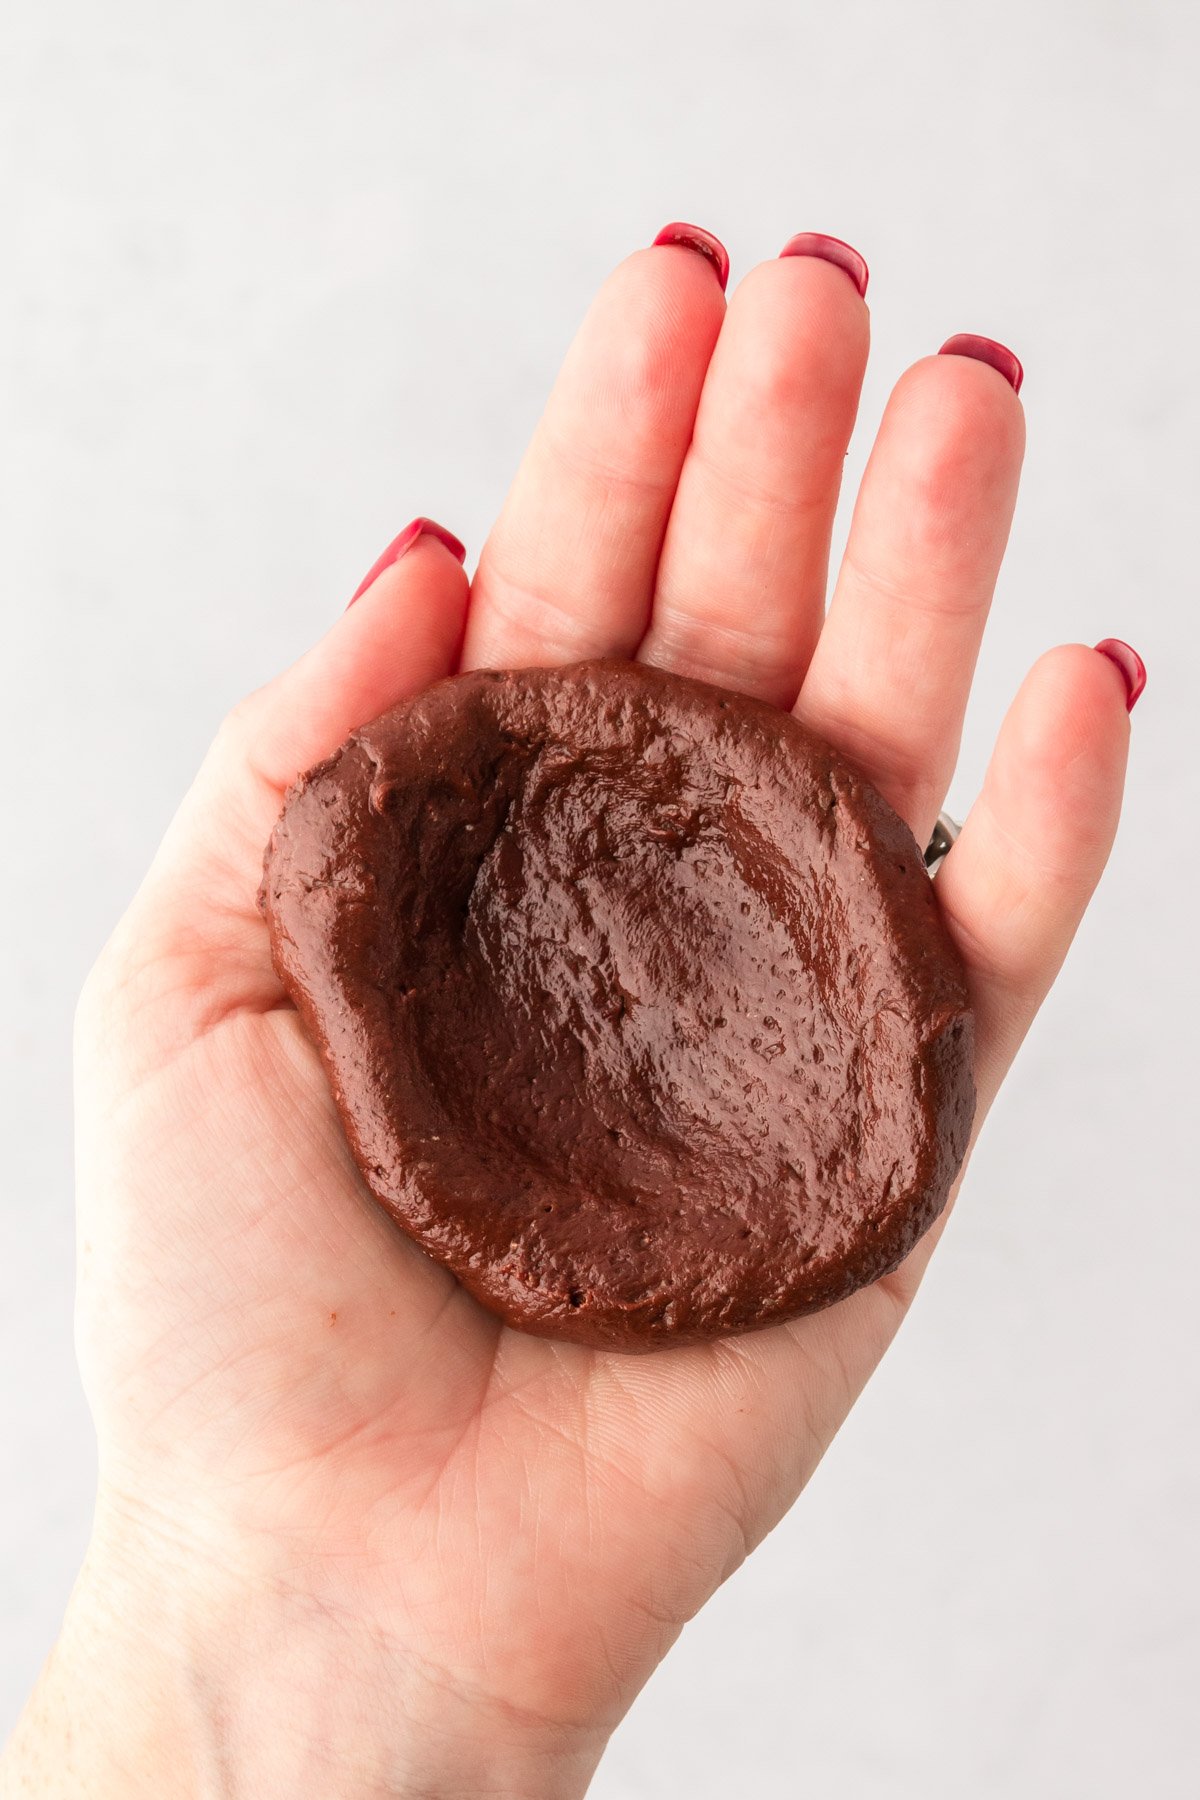 Chocolate cookie dough in a woman's hand in a bowl shape.